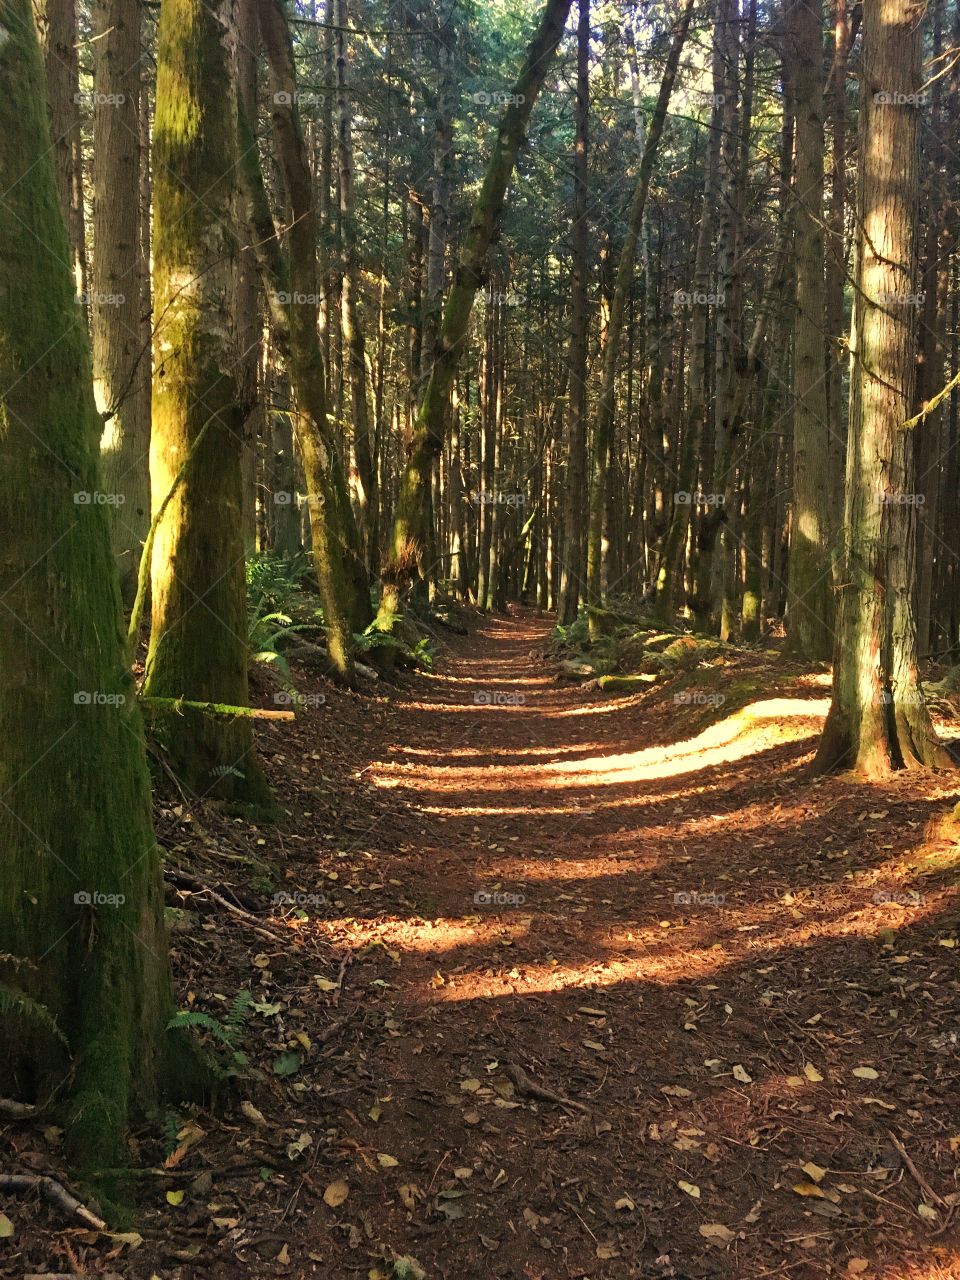 Hiking trail in the Hansville Greenway